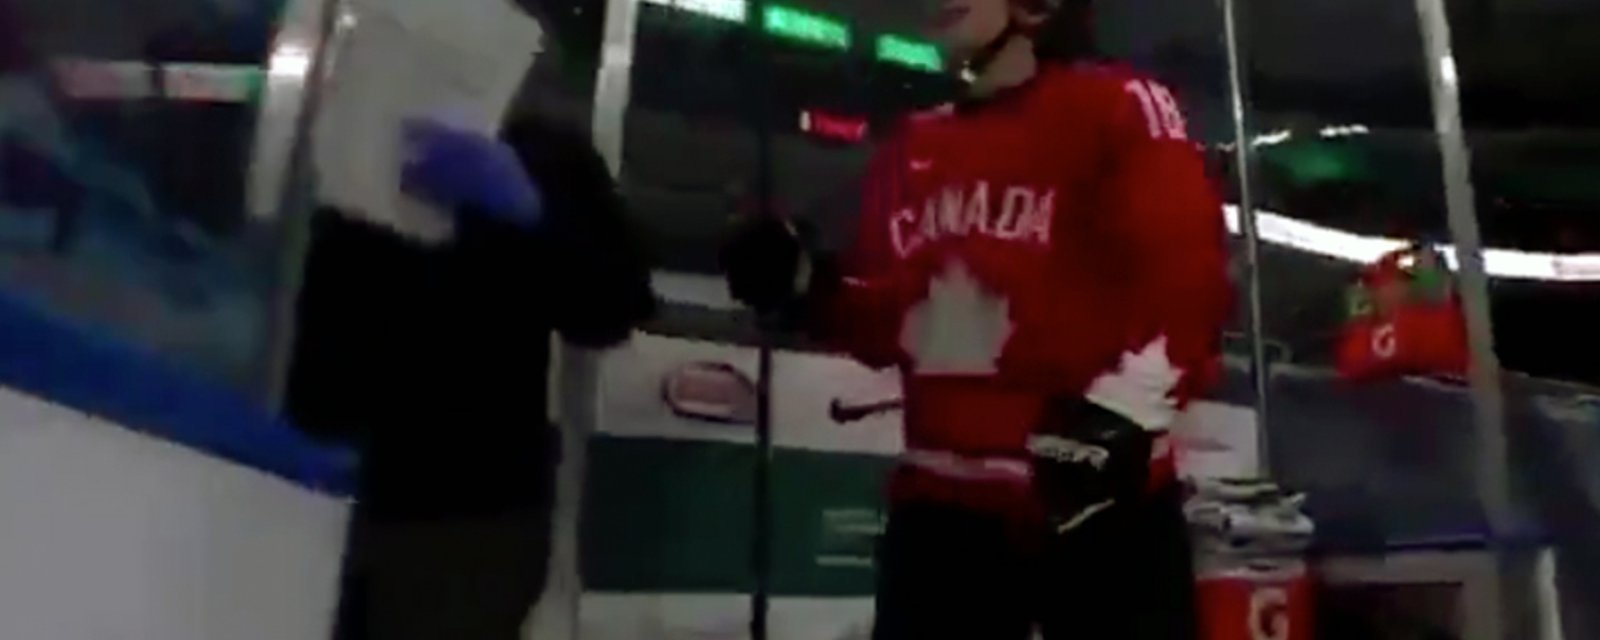 Canadian forward Peyton Krebs caught chirping on mic as he heads to the penalty box